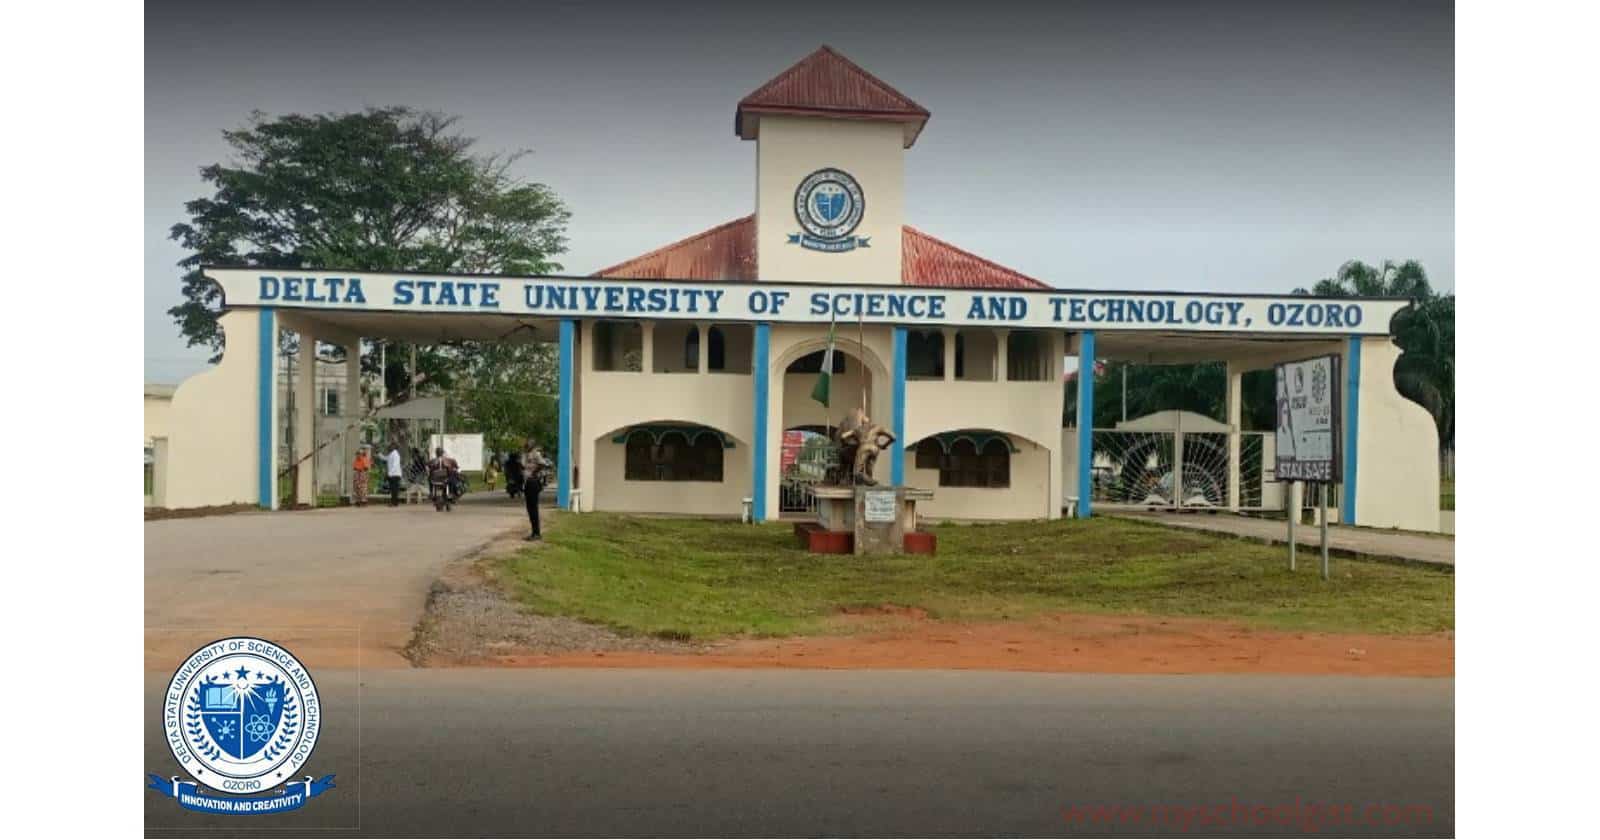 Delta State University of Science and Technology (DSUST) Matriculation Ceremony